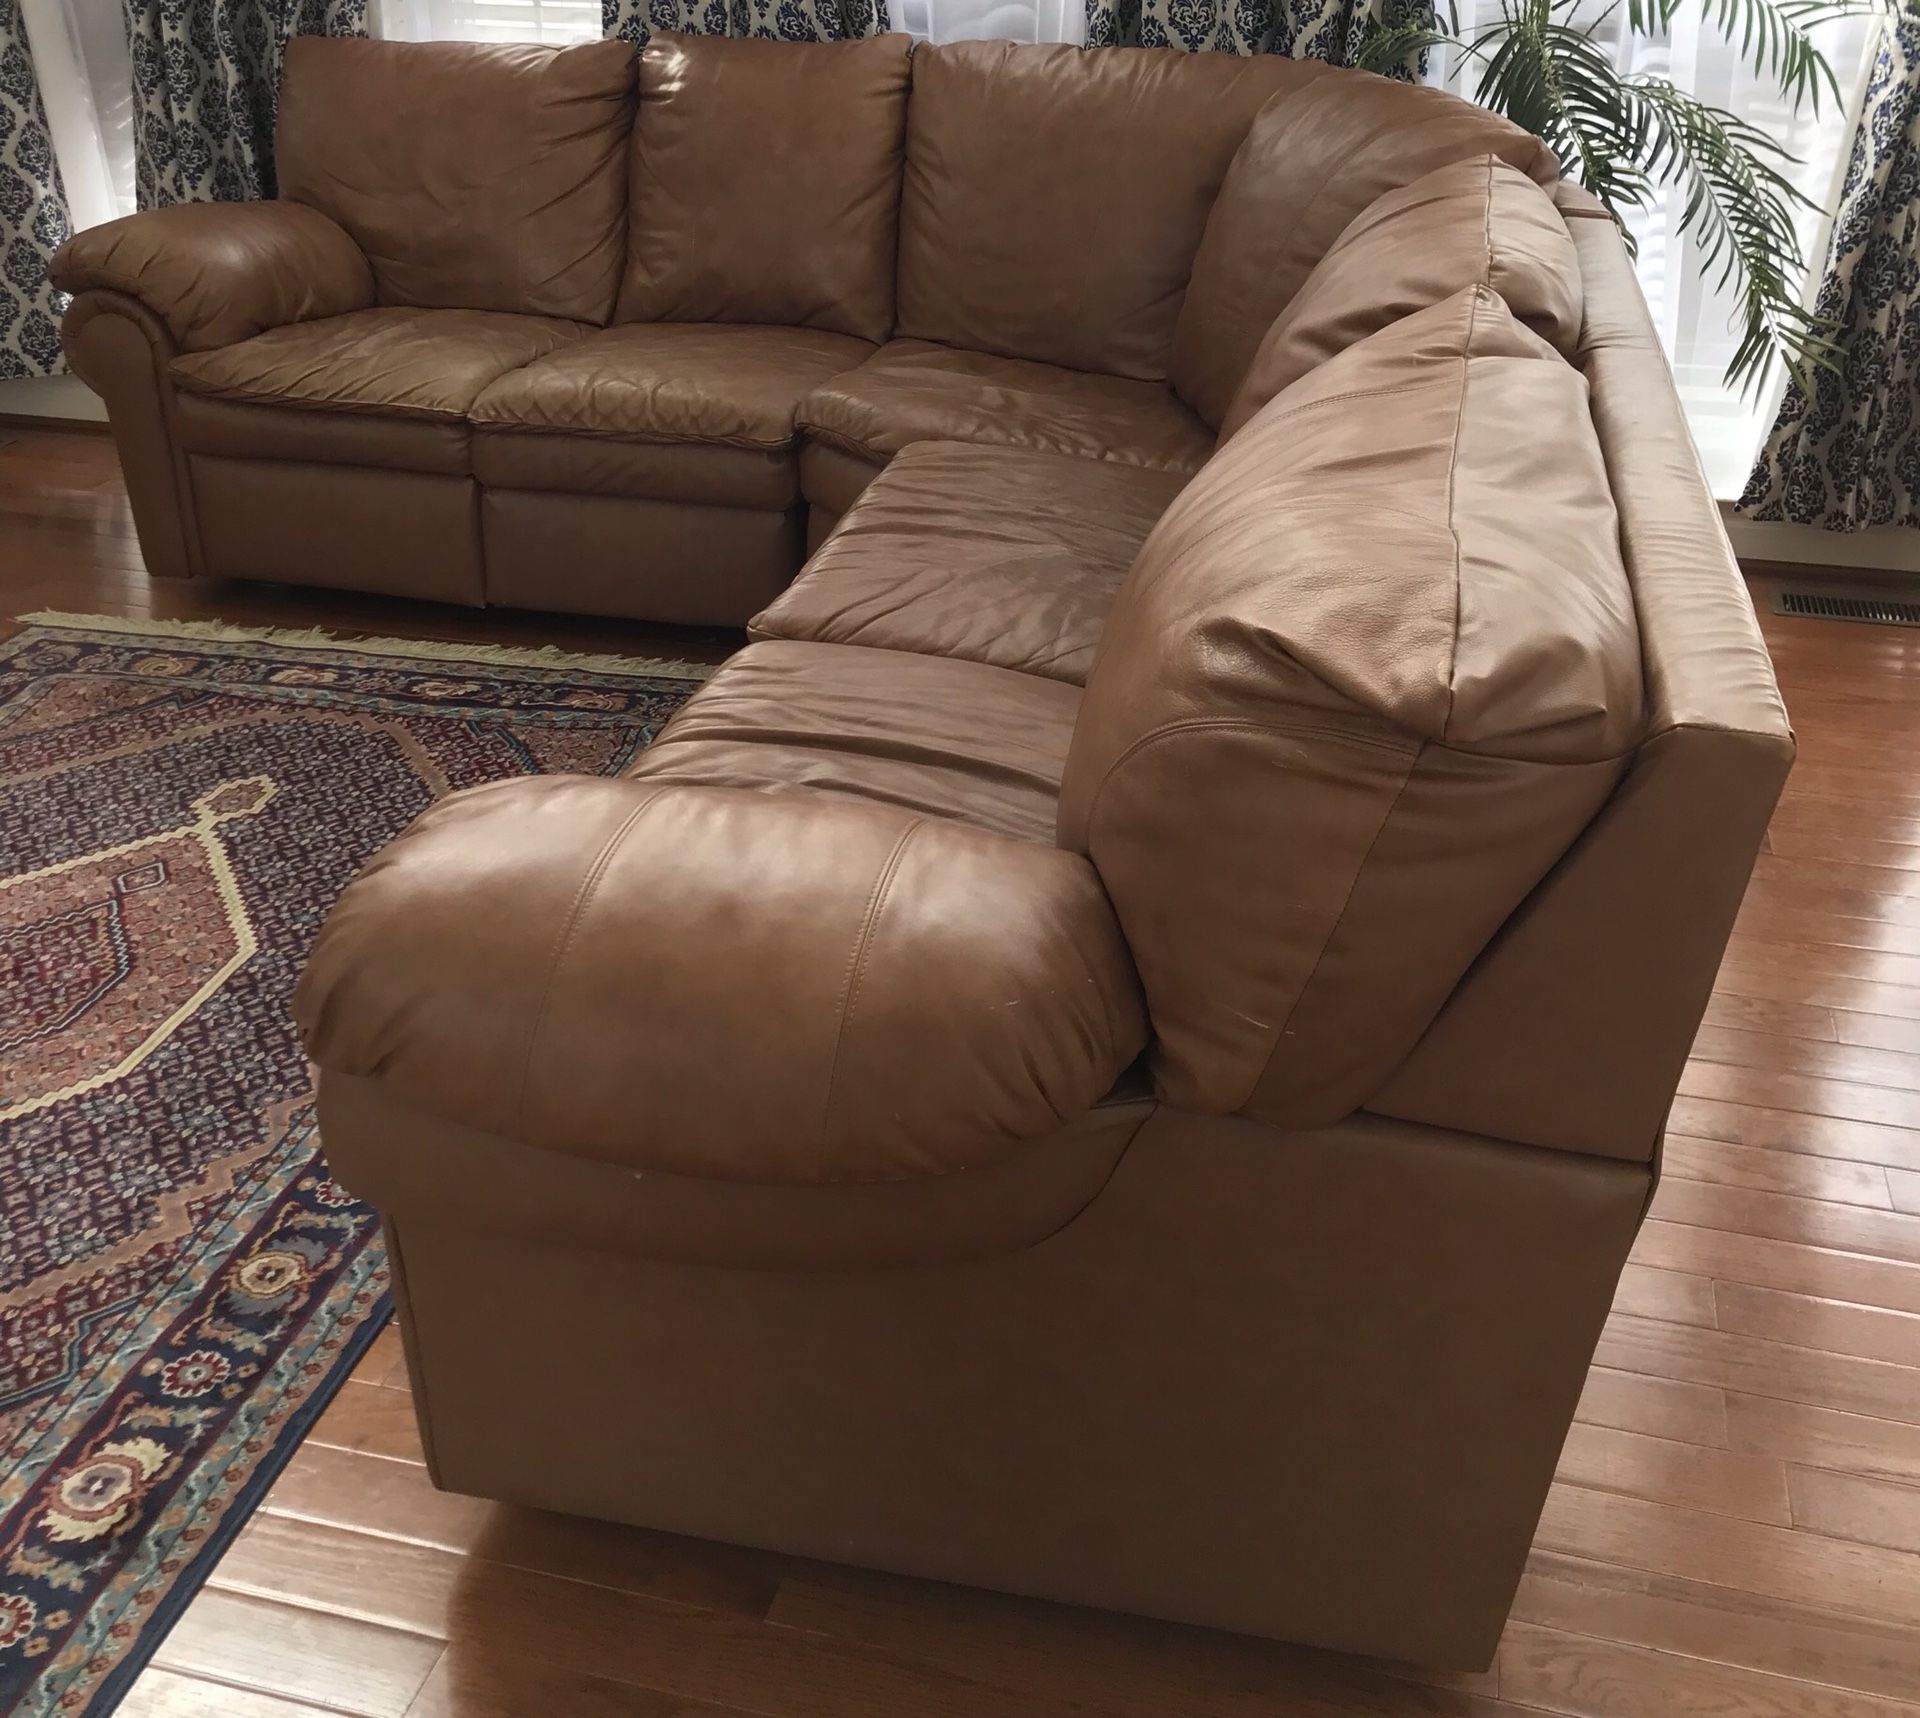 Leather sectional sofa with recliner and pull bed